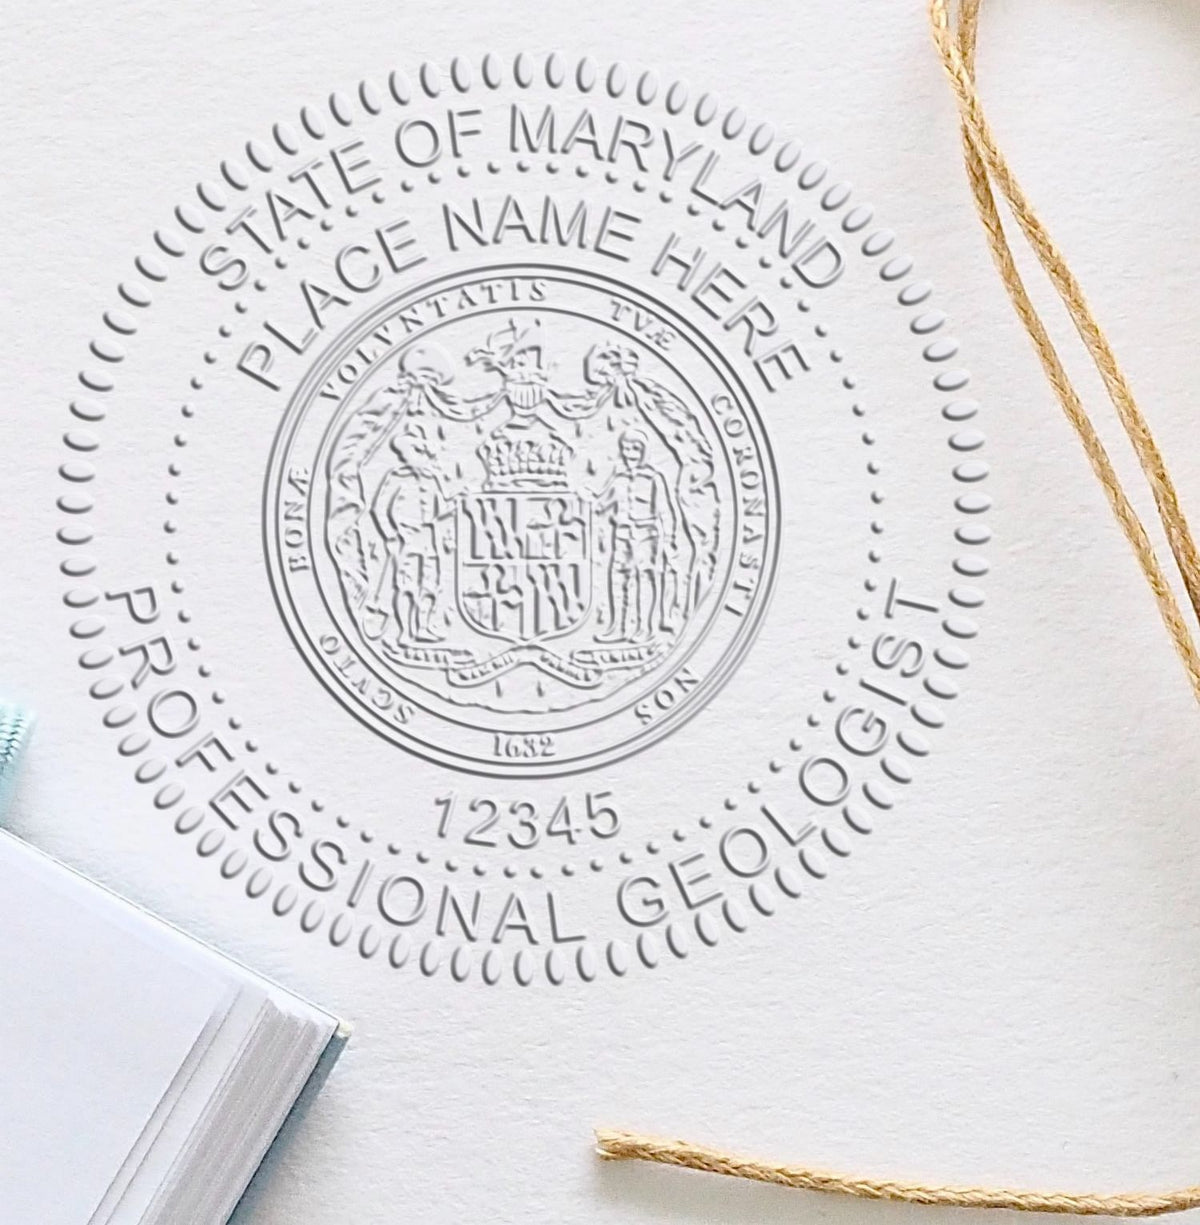 A stamped imprint of the Maryland Geologist Desk Seal in this stylish lifestyle photo, setting the tone for a unique and personalized product.